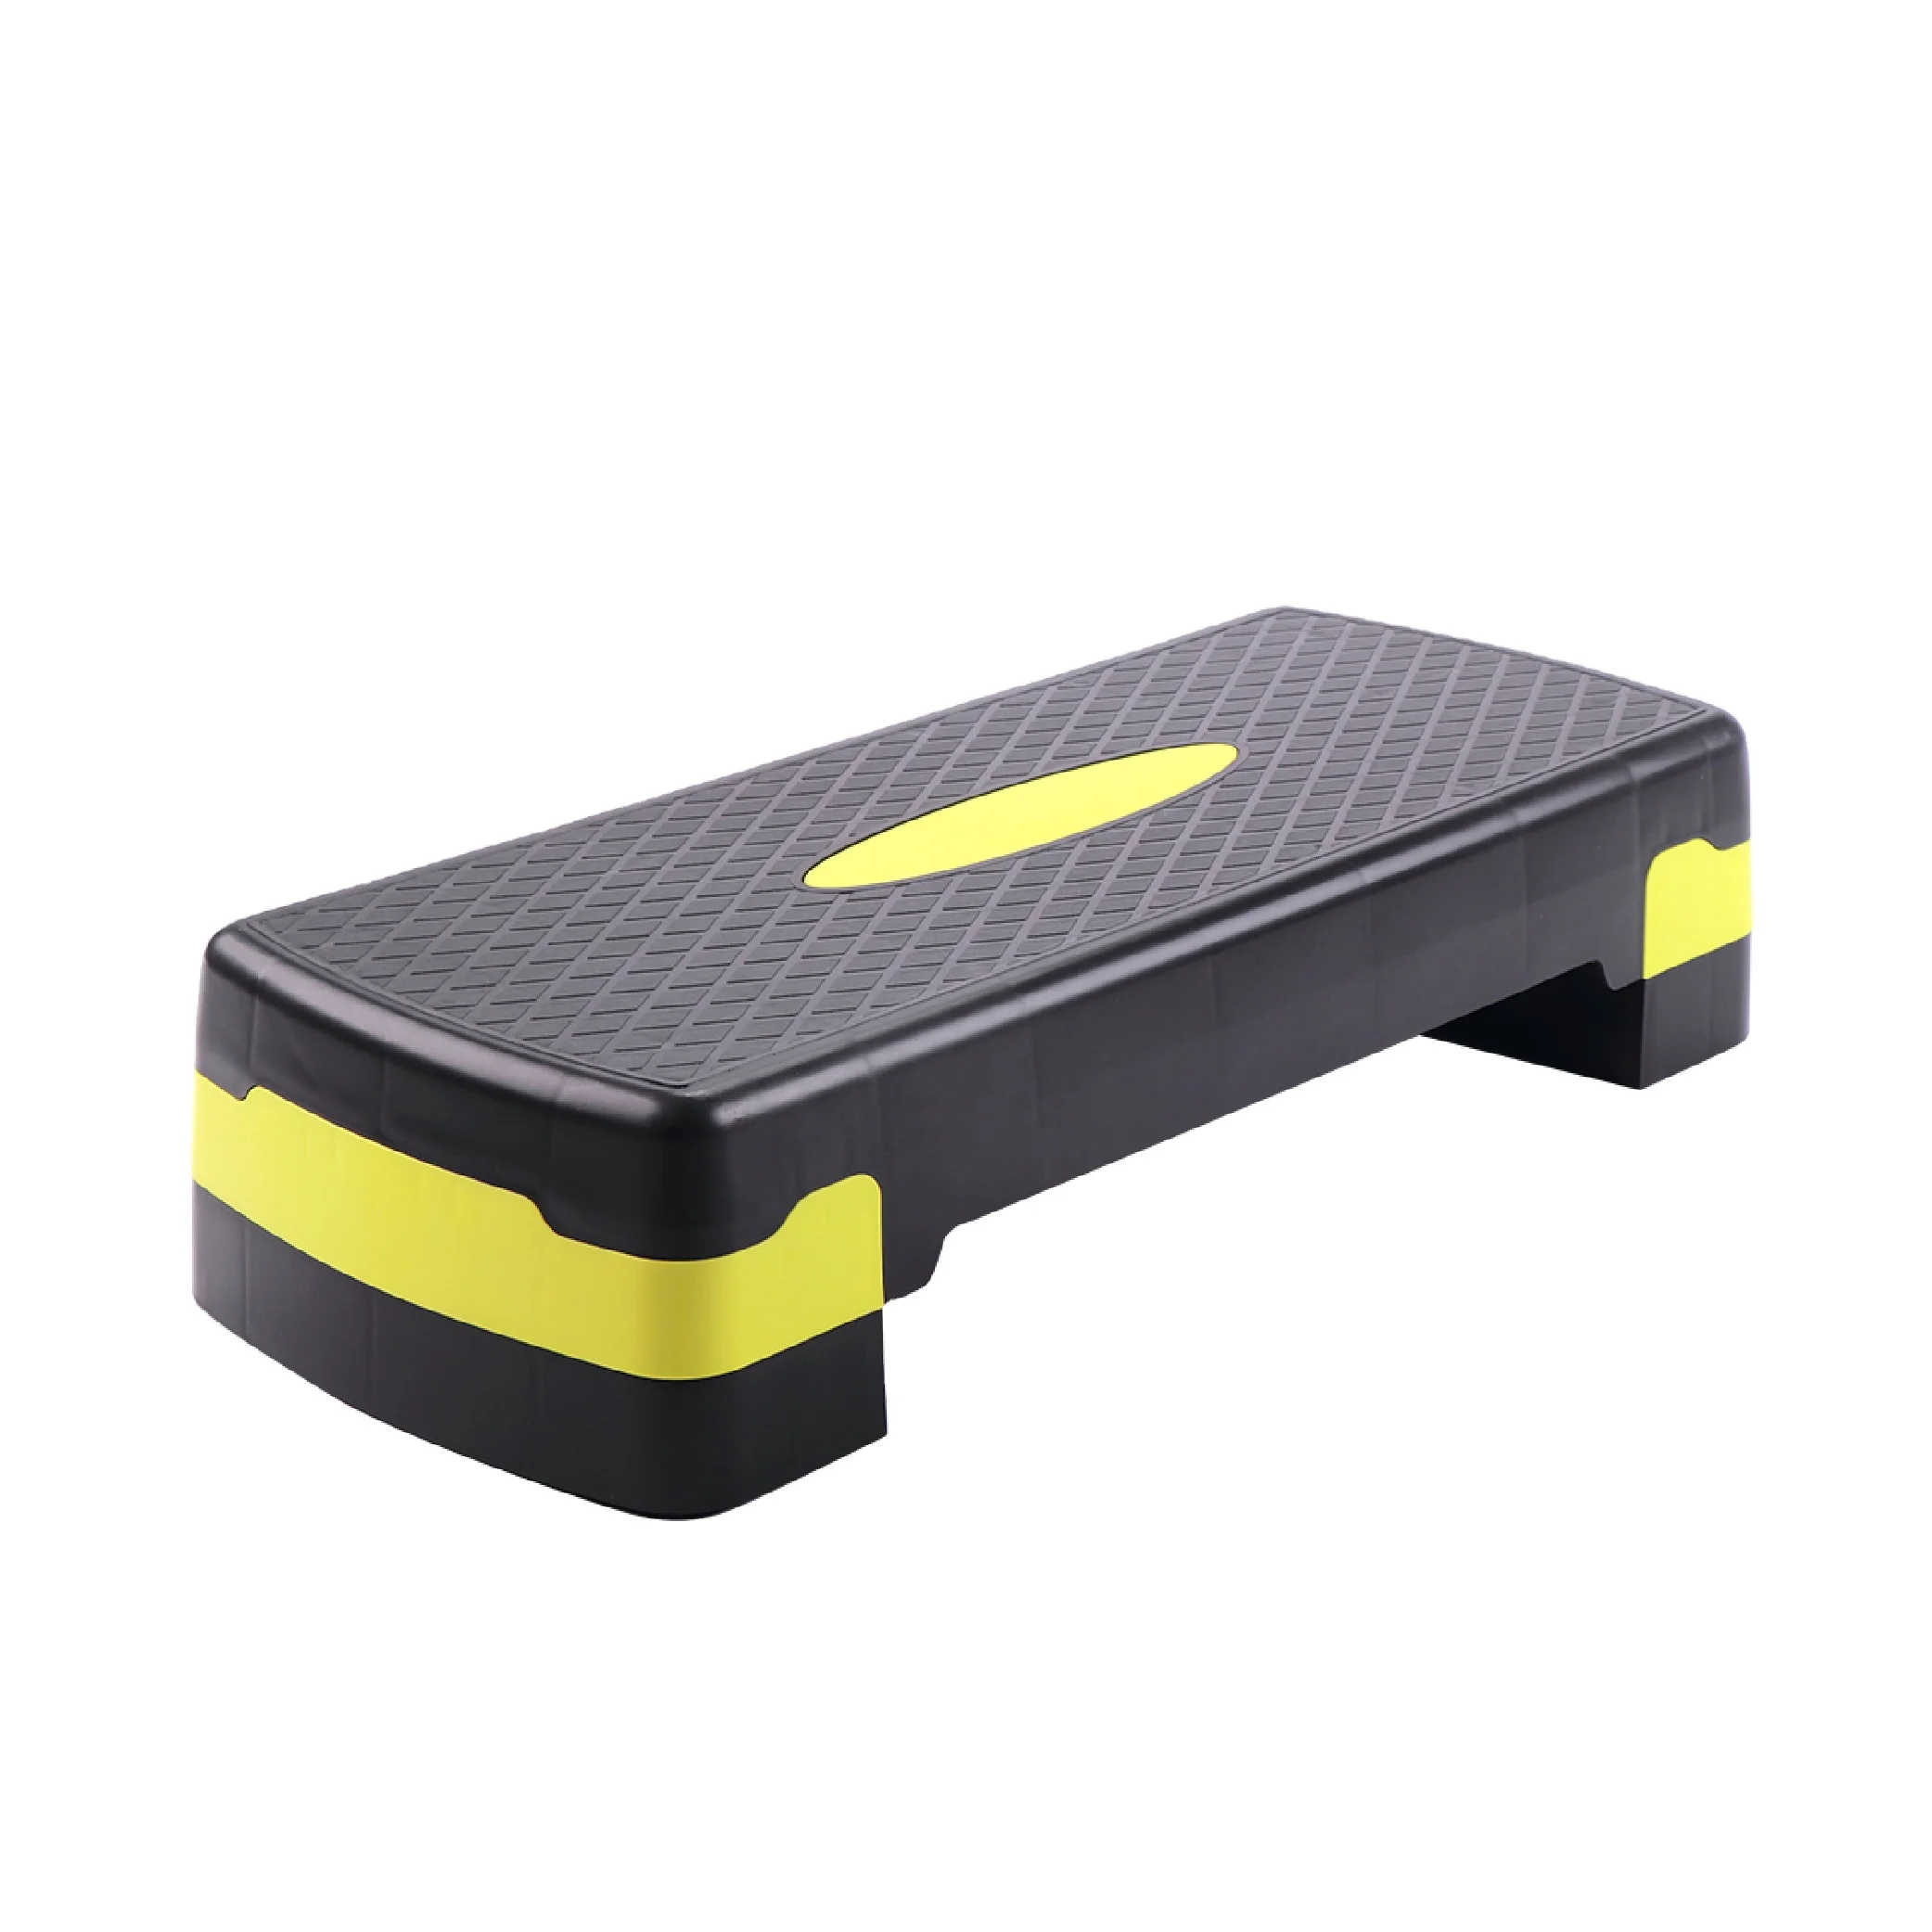 

Home Indoor Fitness Adjustable Aerobic Step Platform with 2 levels custom logo in stock, Black+grey/red/green/orange,or customize